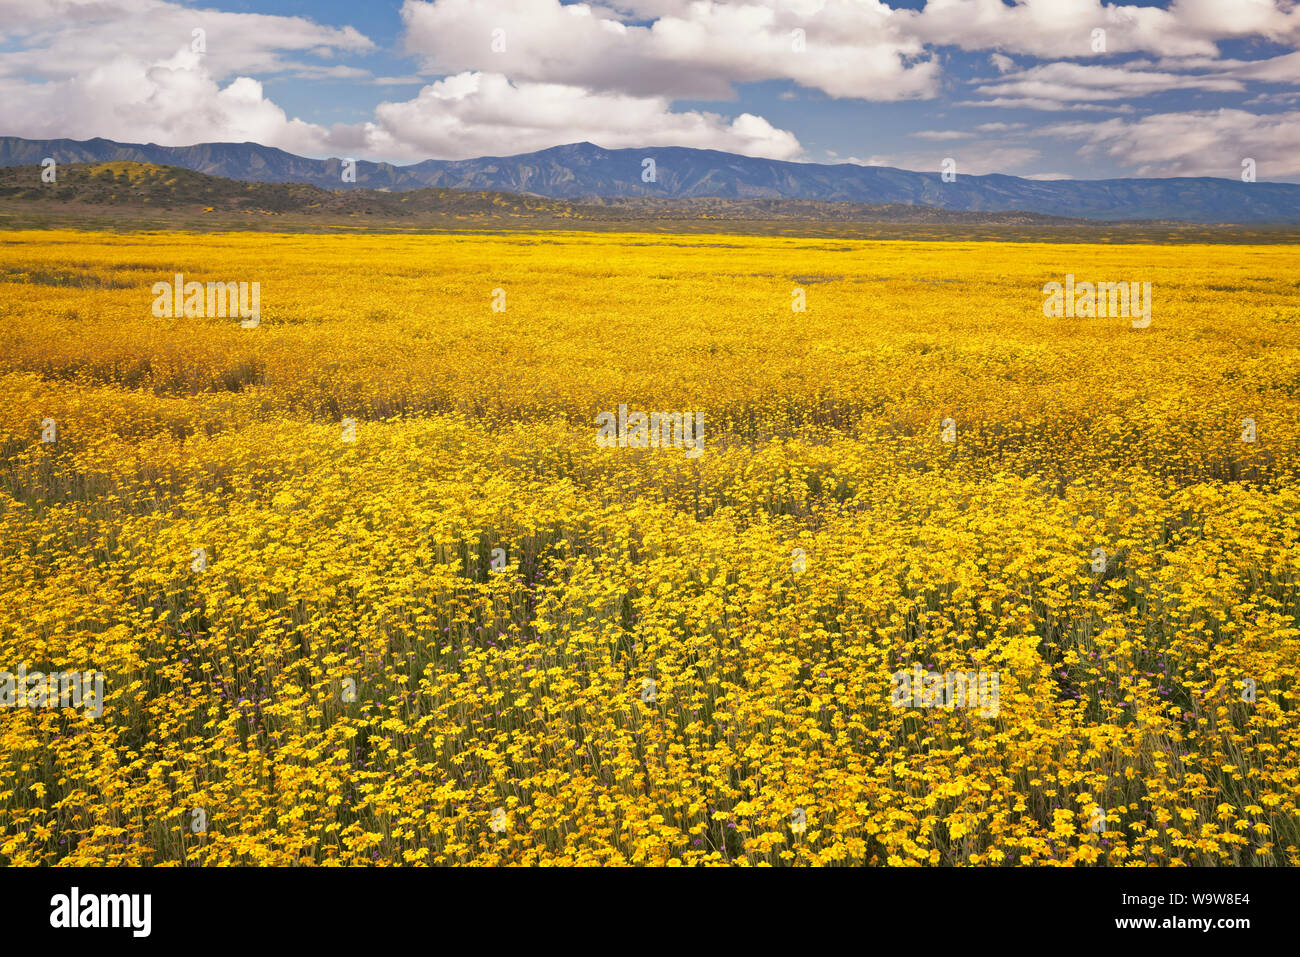 A palette of wildflowers carpet the Temblor Range during the spring Super Bloom in California’s Carrizo Plain National Monument. Stock Photo